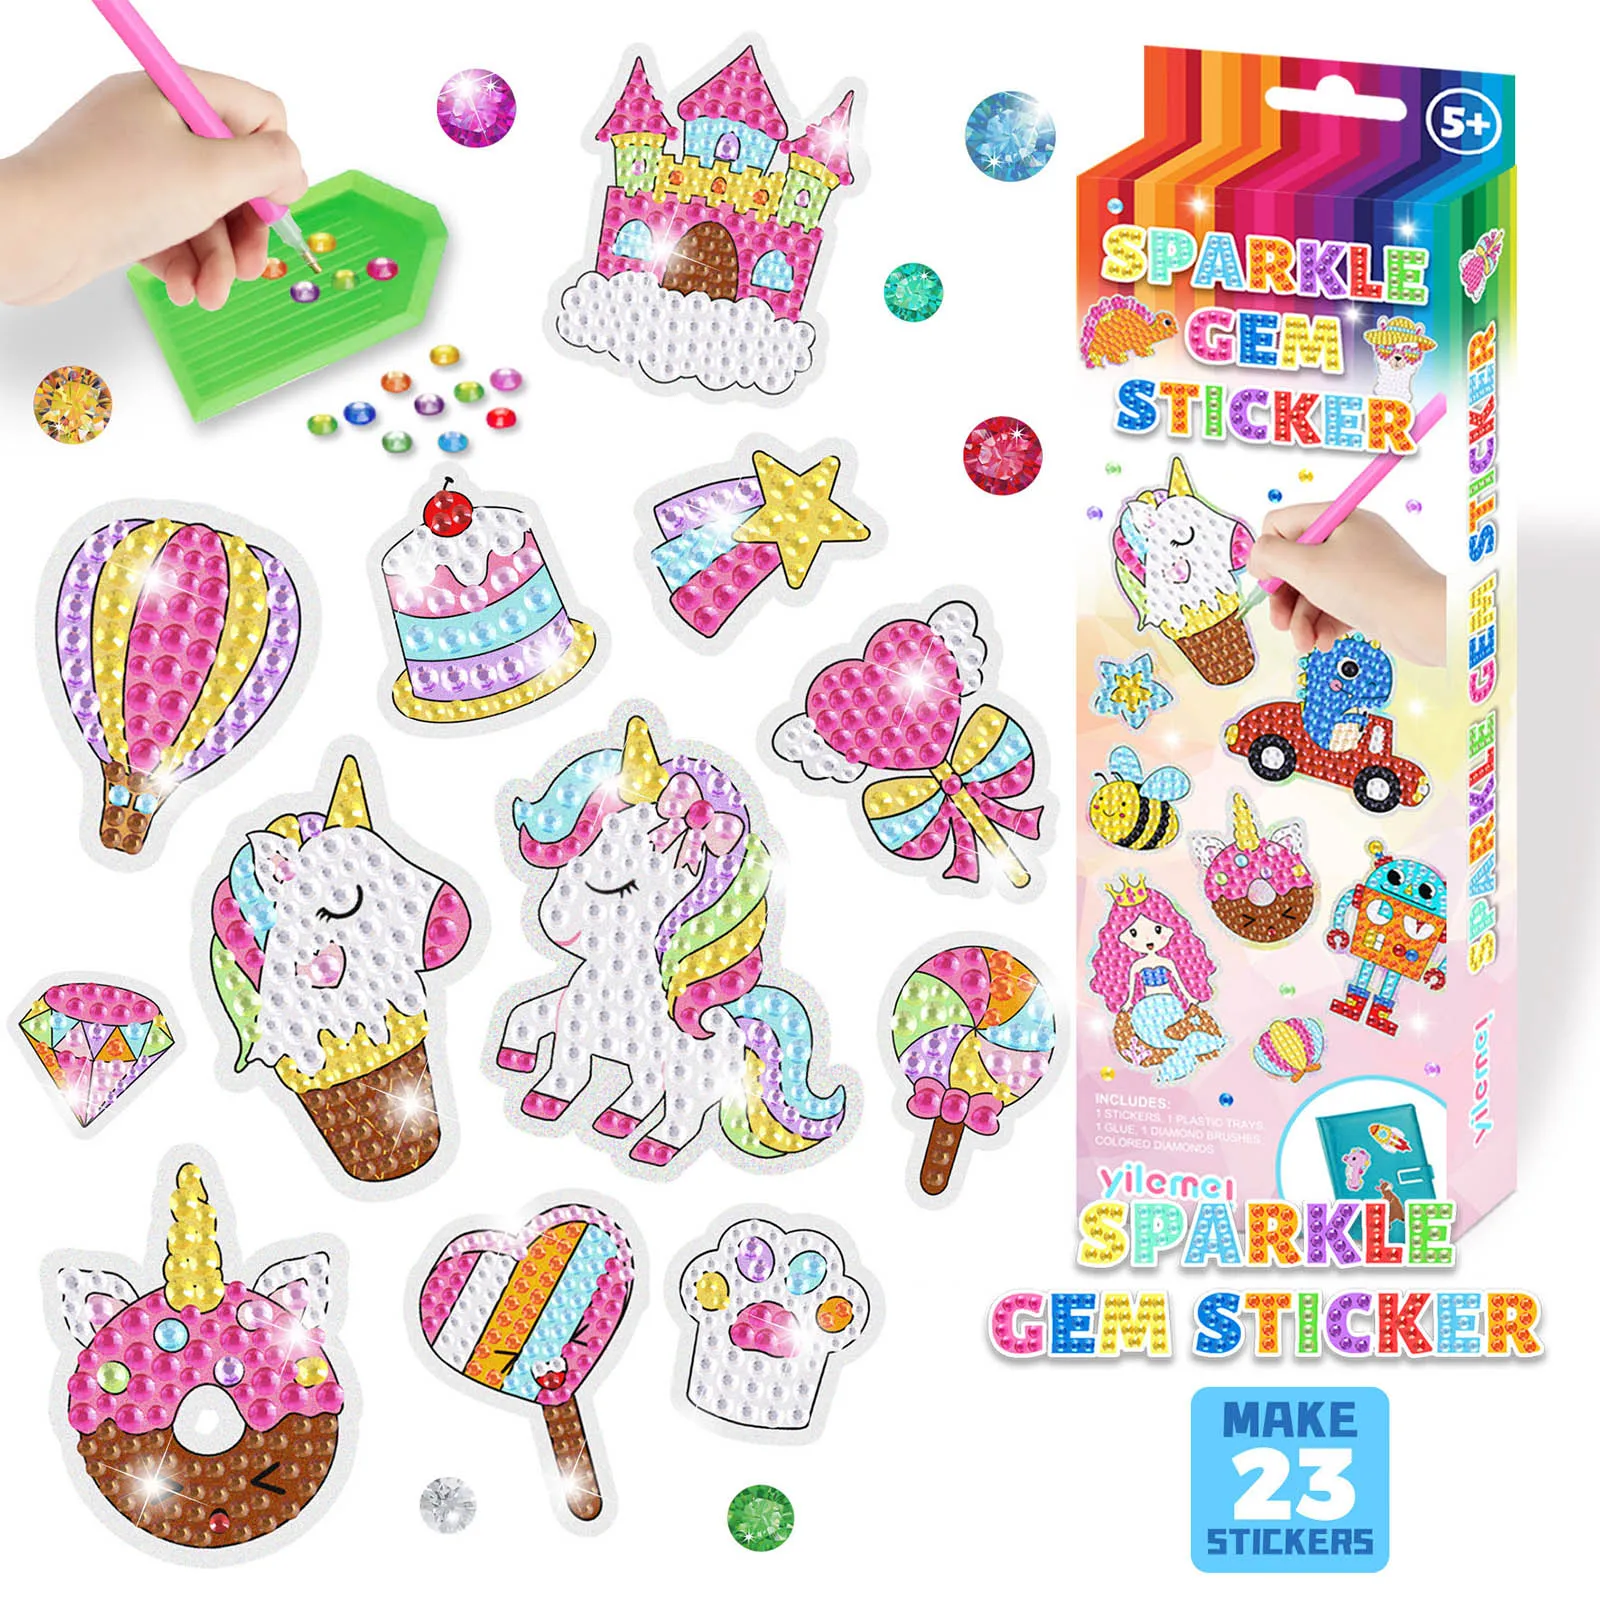 5D DIY Diamond Painting Sticker Kit for Kids Cute Pattern Handmade Sticker Paint Ornament Arts Crafts Gifts for Girls Boys Pony